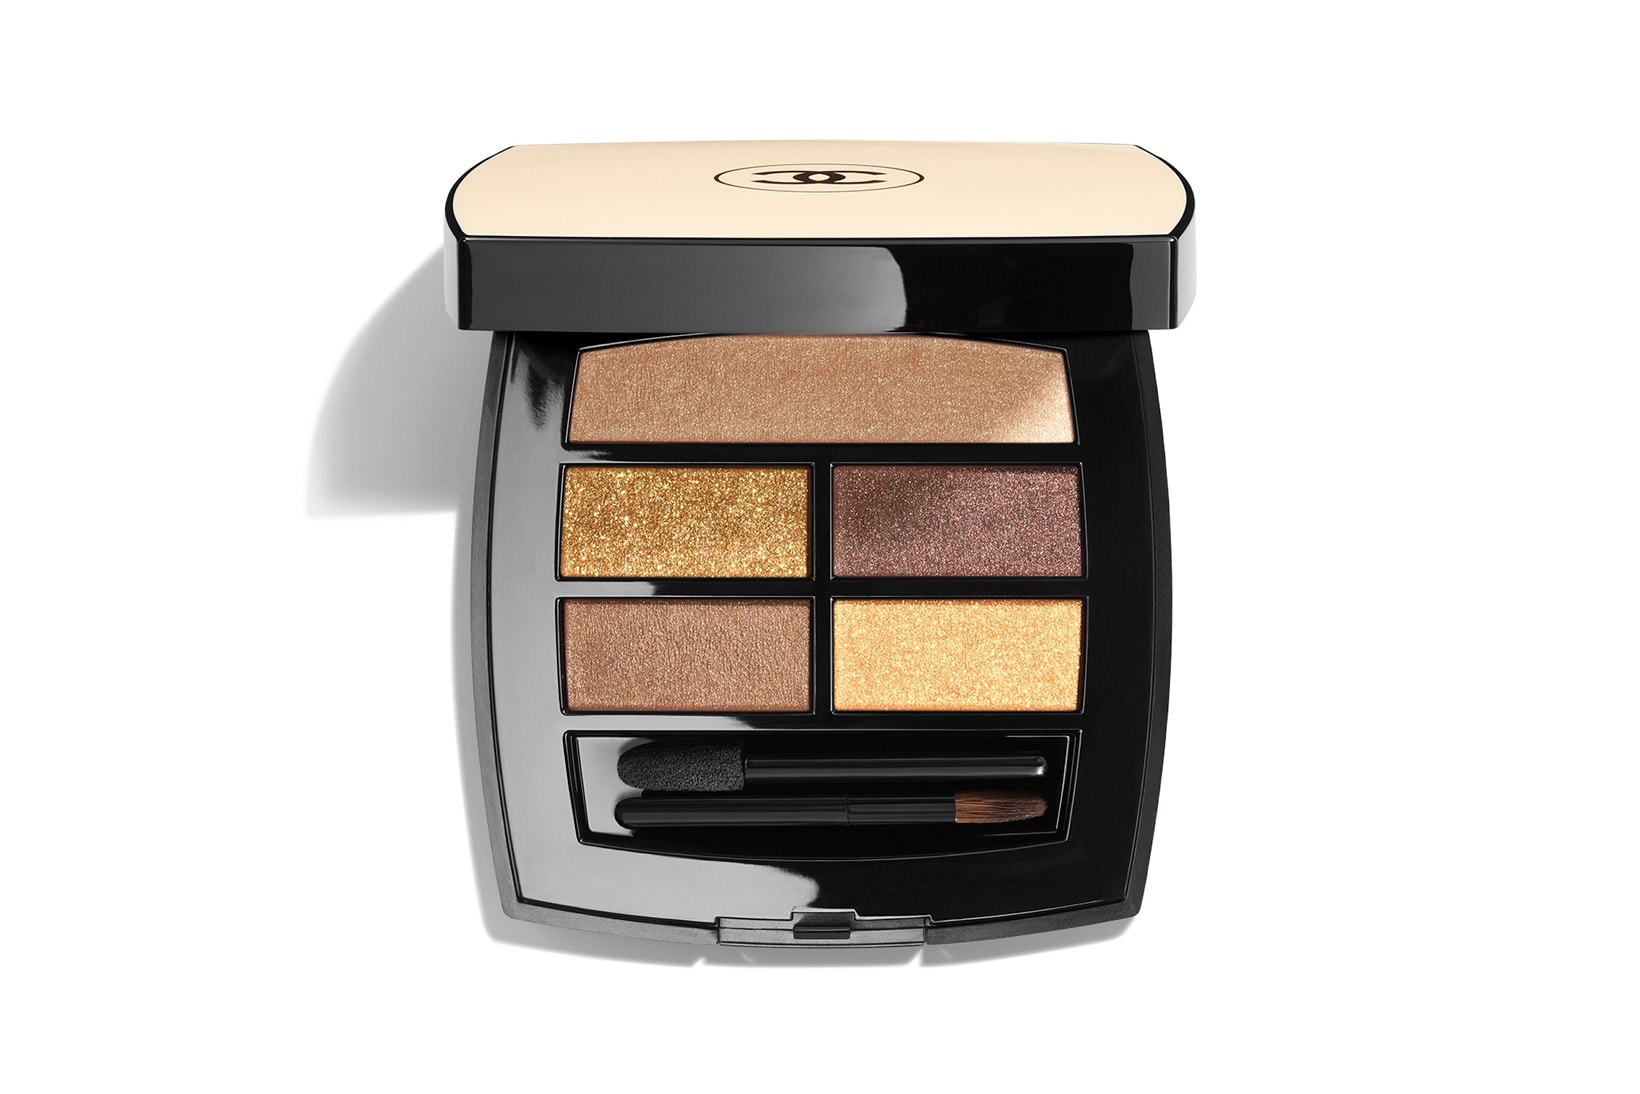 Chanel Beauty LES BEIGES Healthy Glow Natural Eyeshadow Palette Deep